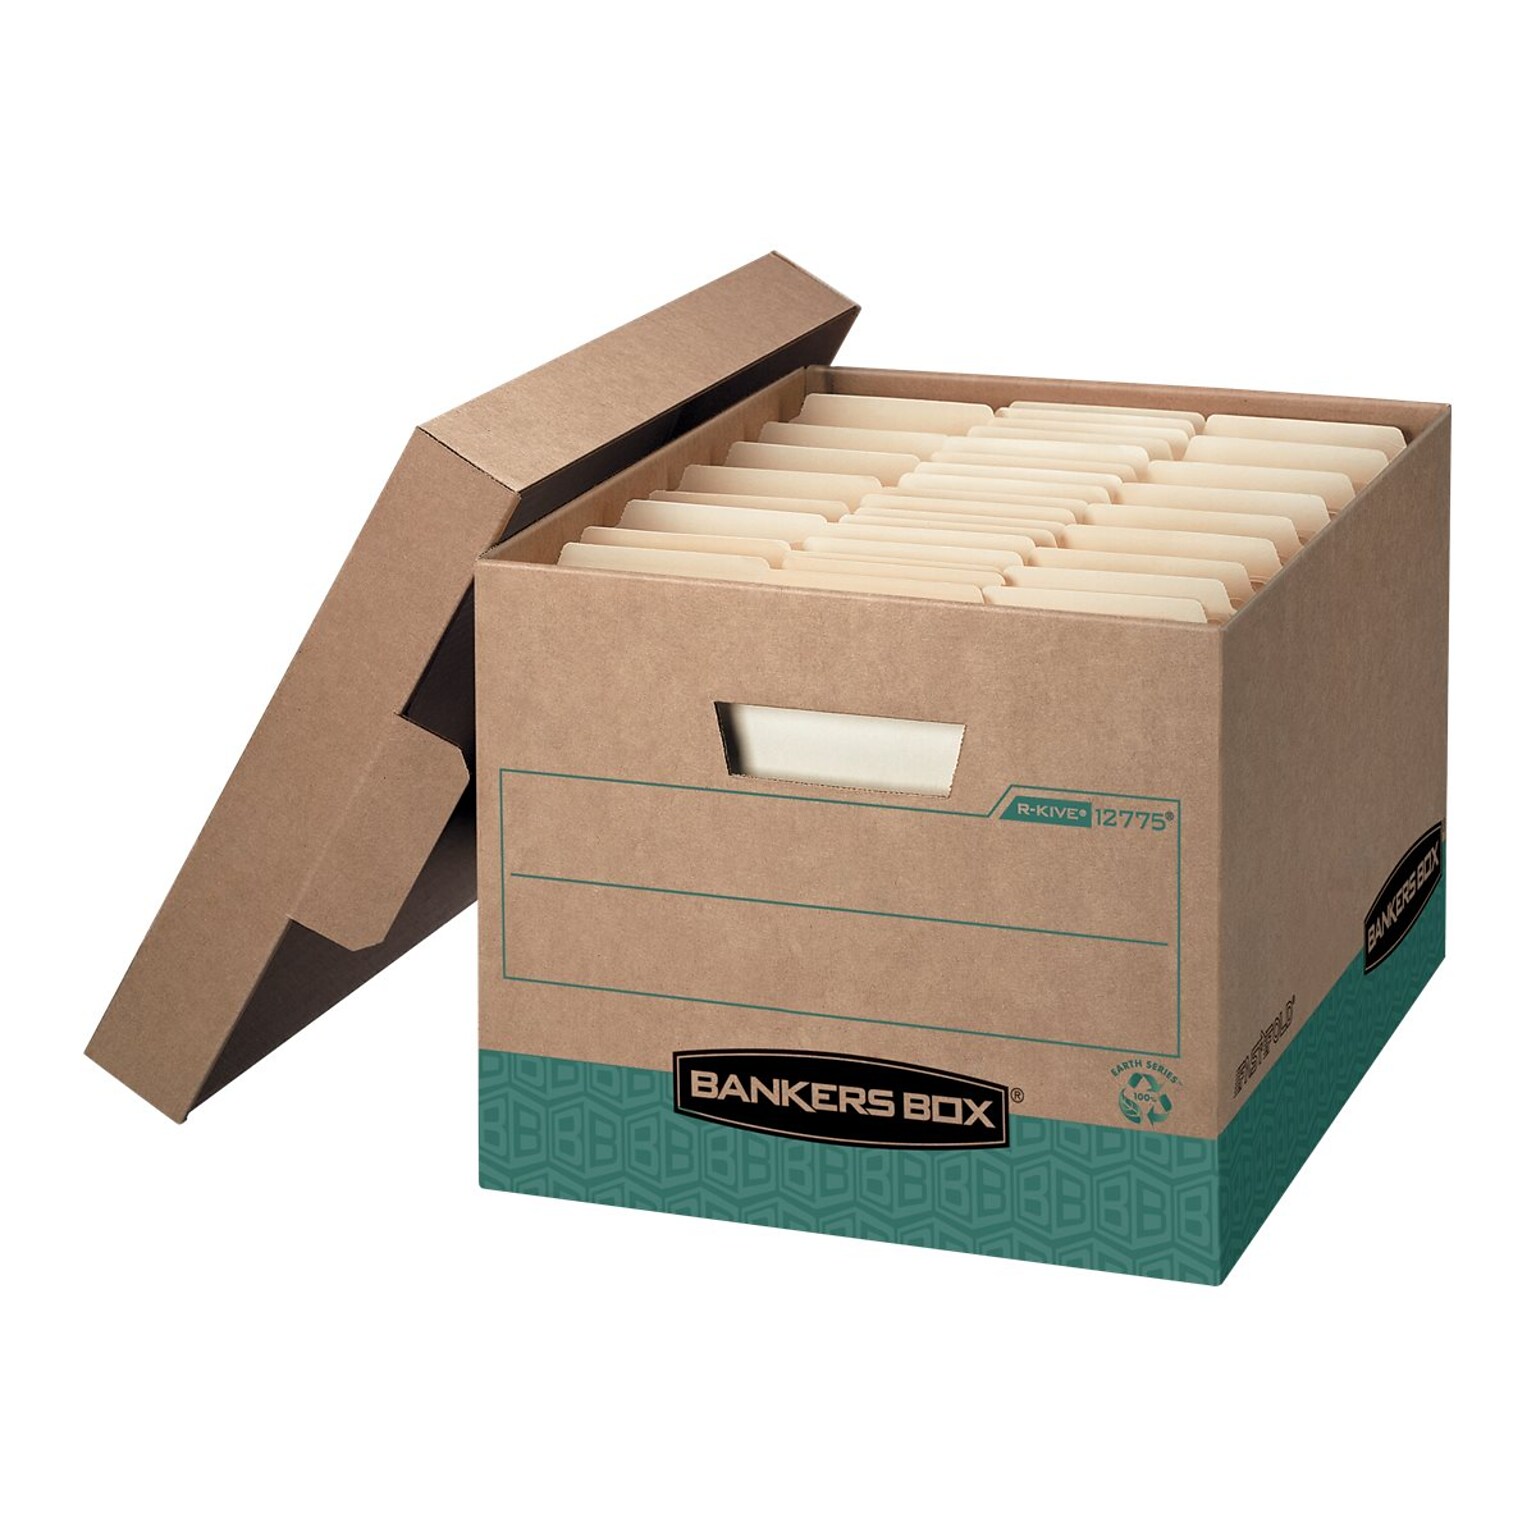 Bankers Box® R-Kive Heavy-Duty Recycled File Storage Boxes, Lift-Off Lid, Letter/Legal Size, Brown, 12/Carton (12775)